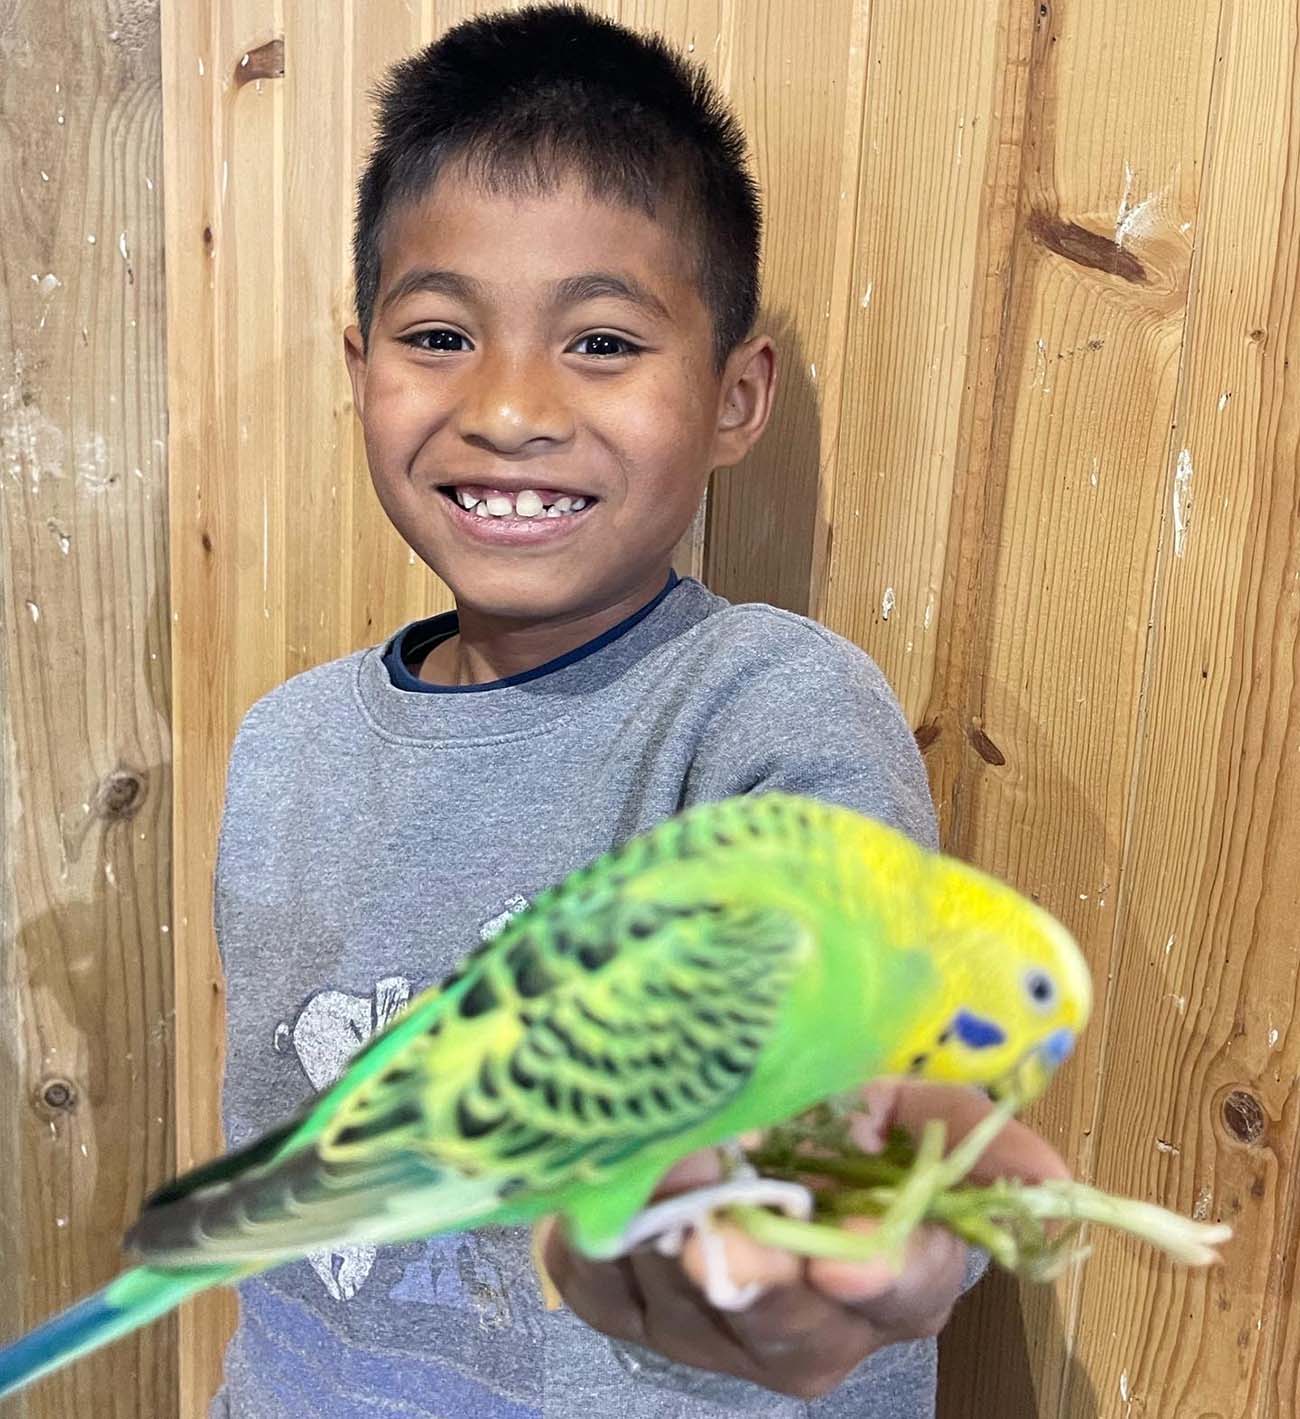 Little boy in grey sweatshirt grins with a bright yellow and green parrot eating out of his hand